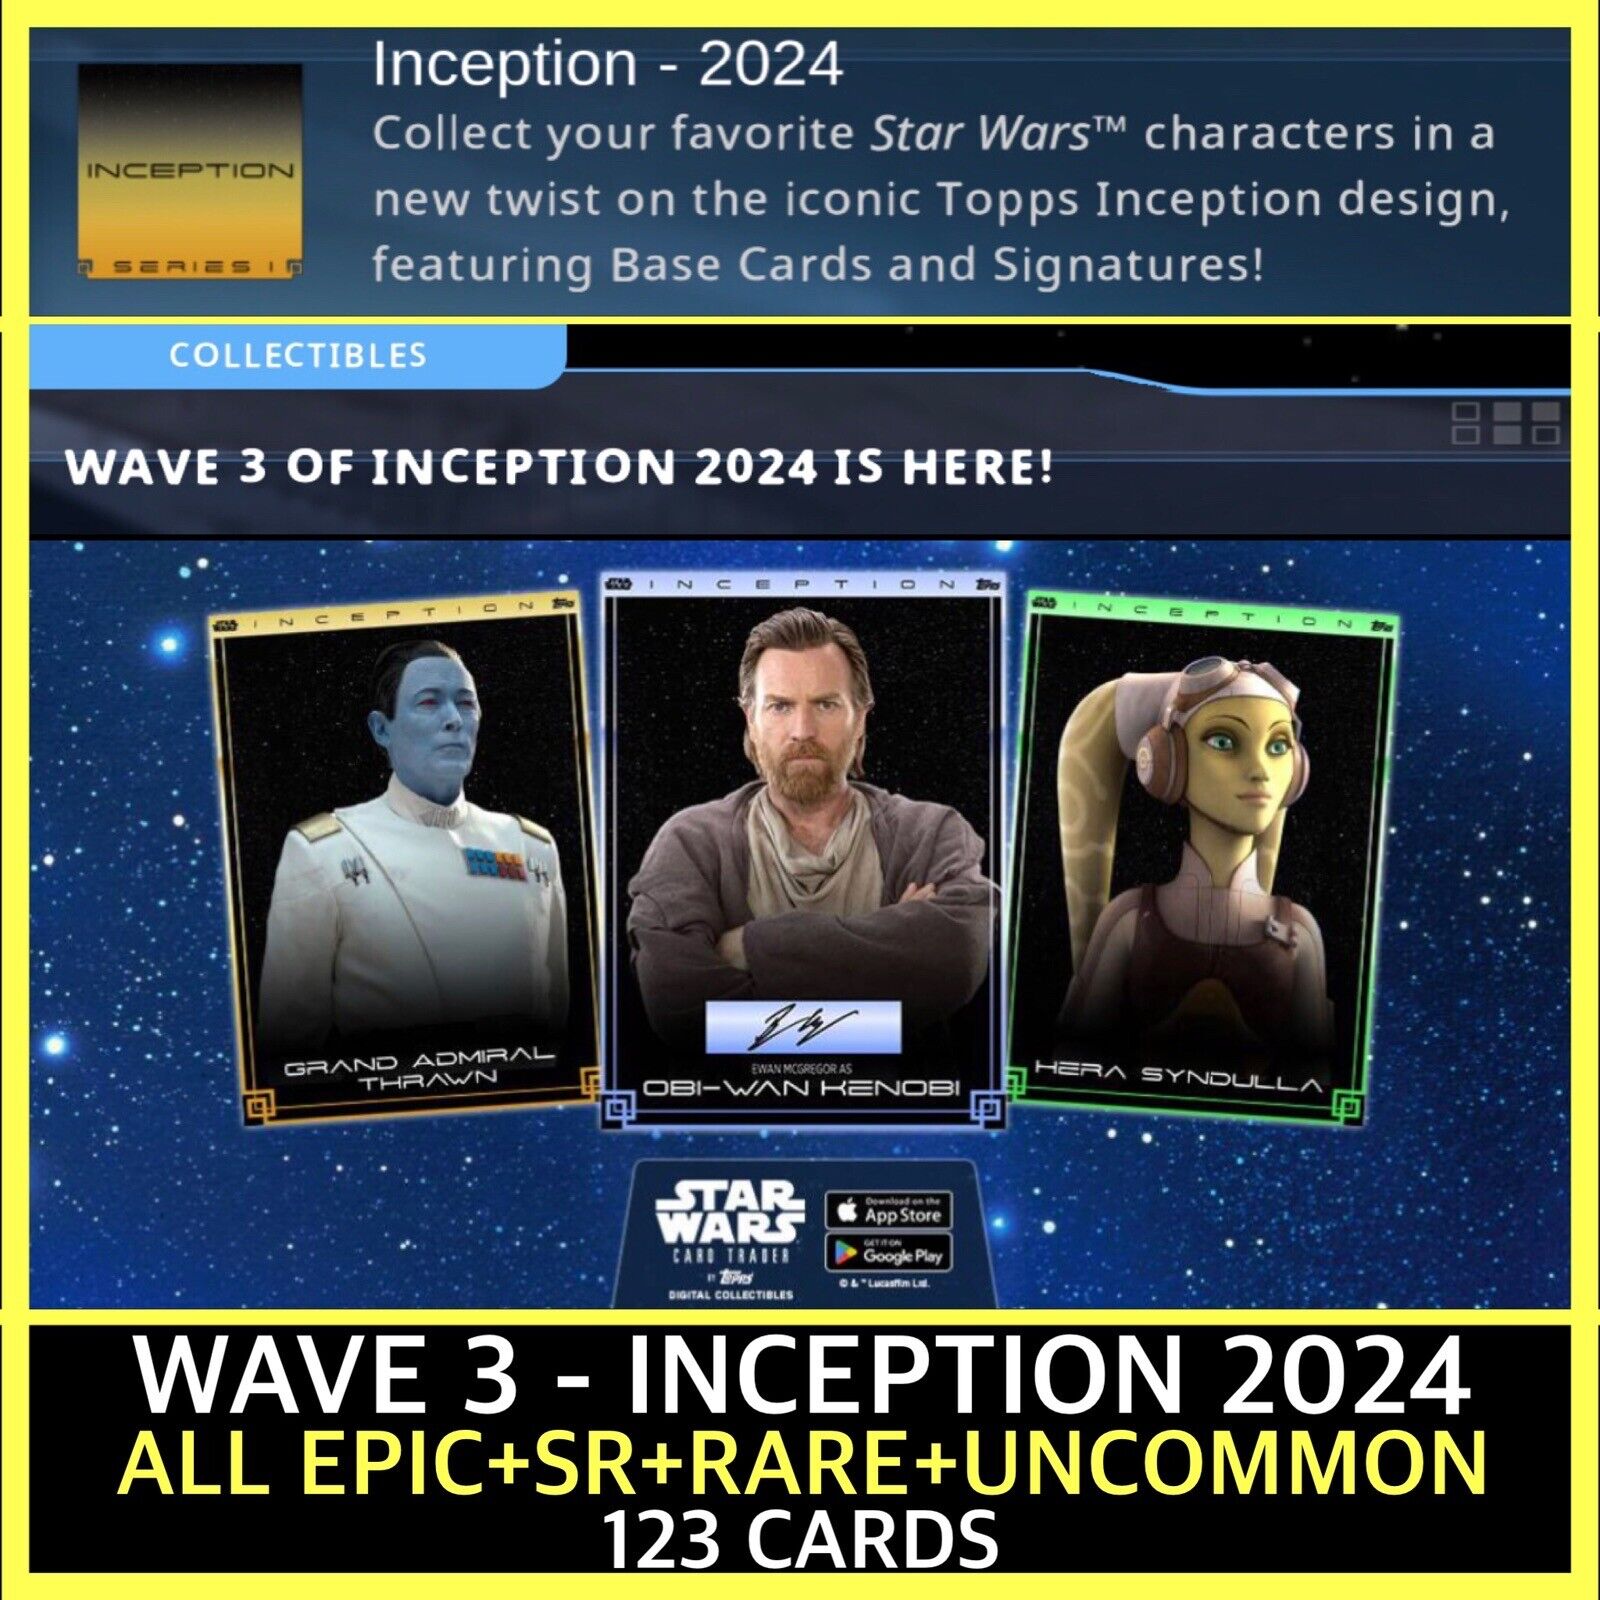 SERIES 3-INCEPTION 2024-EPIC+SR+R+UC SETS-123 CARD-TOPPS STAR WARS CARD TRADER